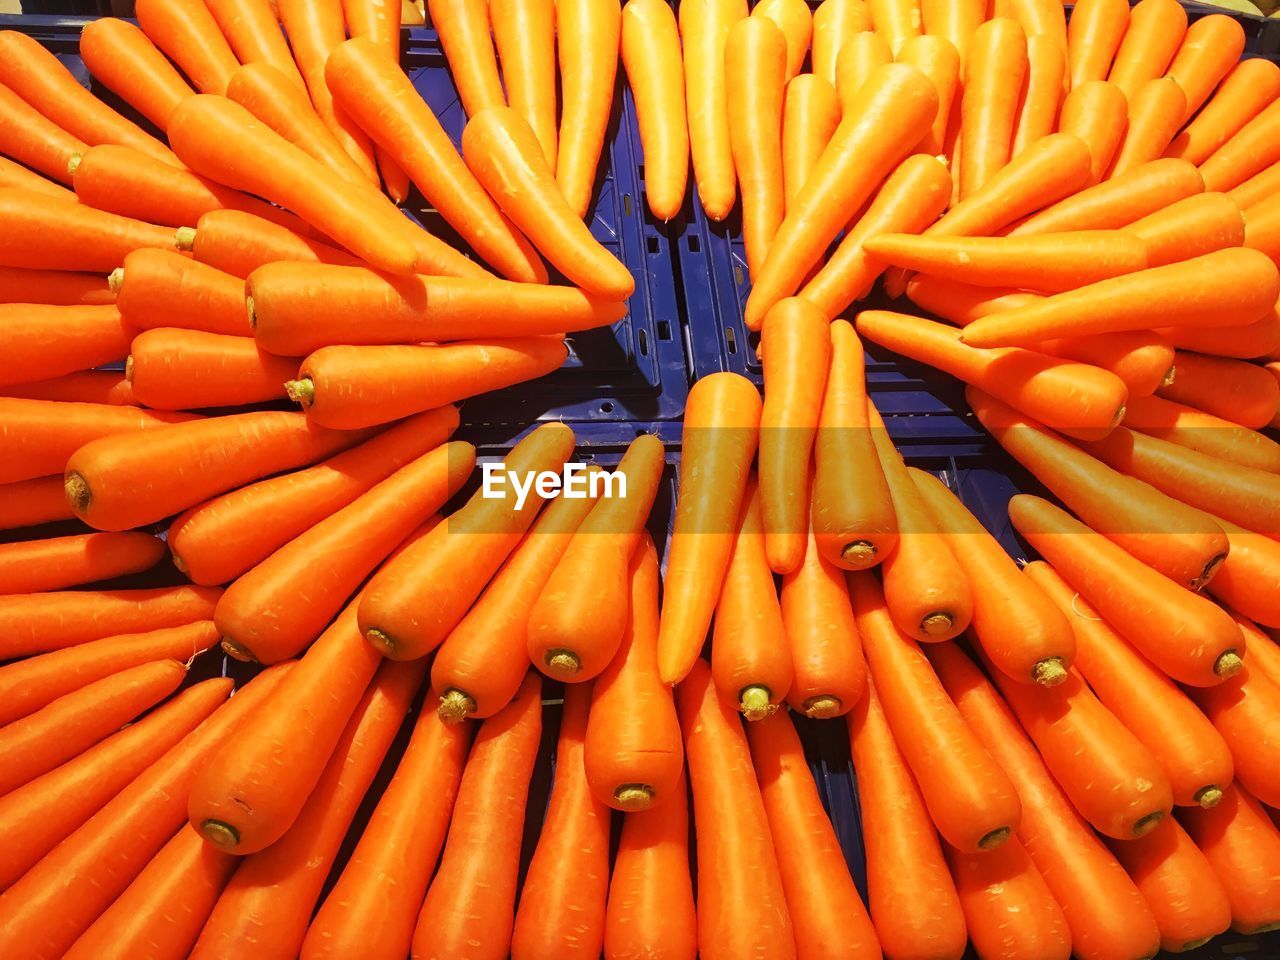 Fresh carrot in grocery store